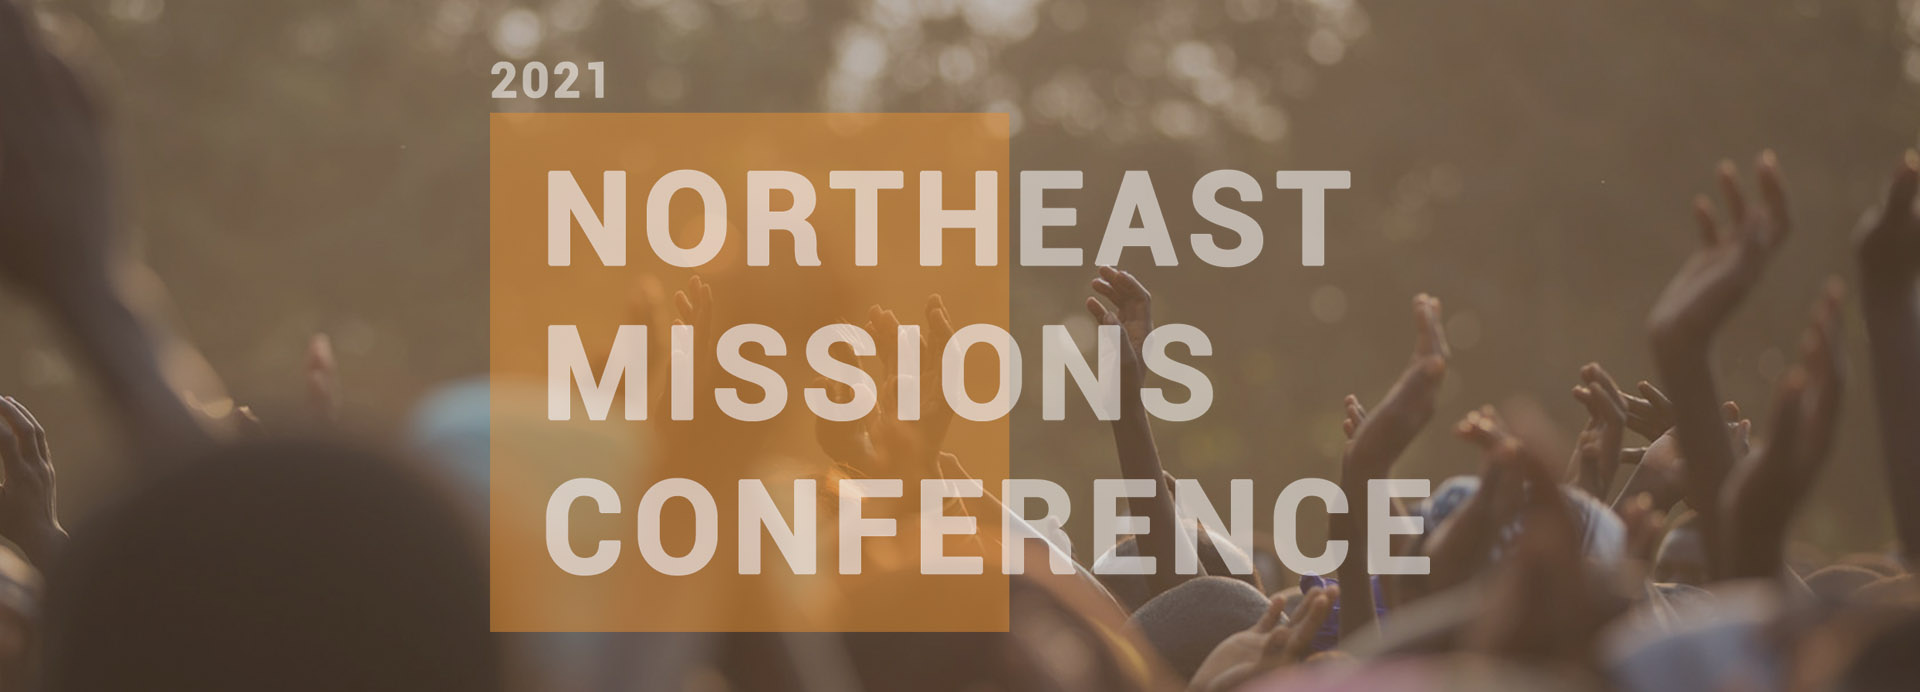 Missions Conference 2021